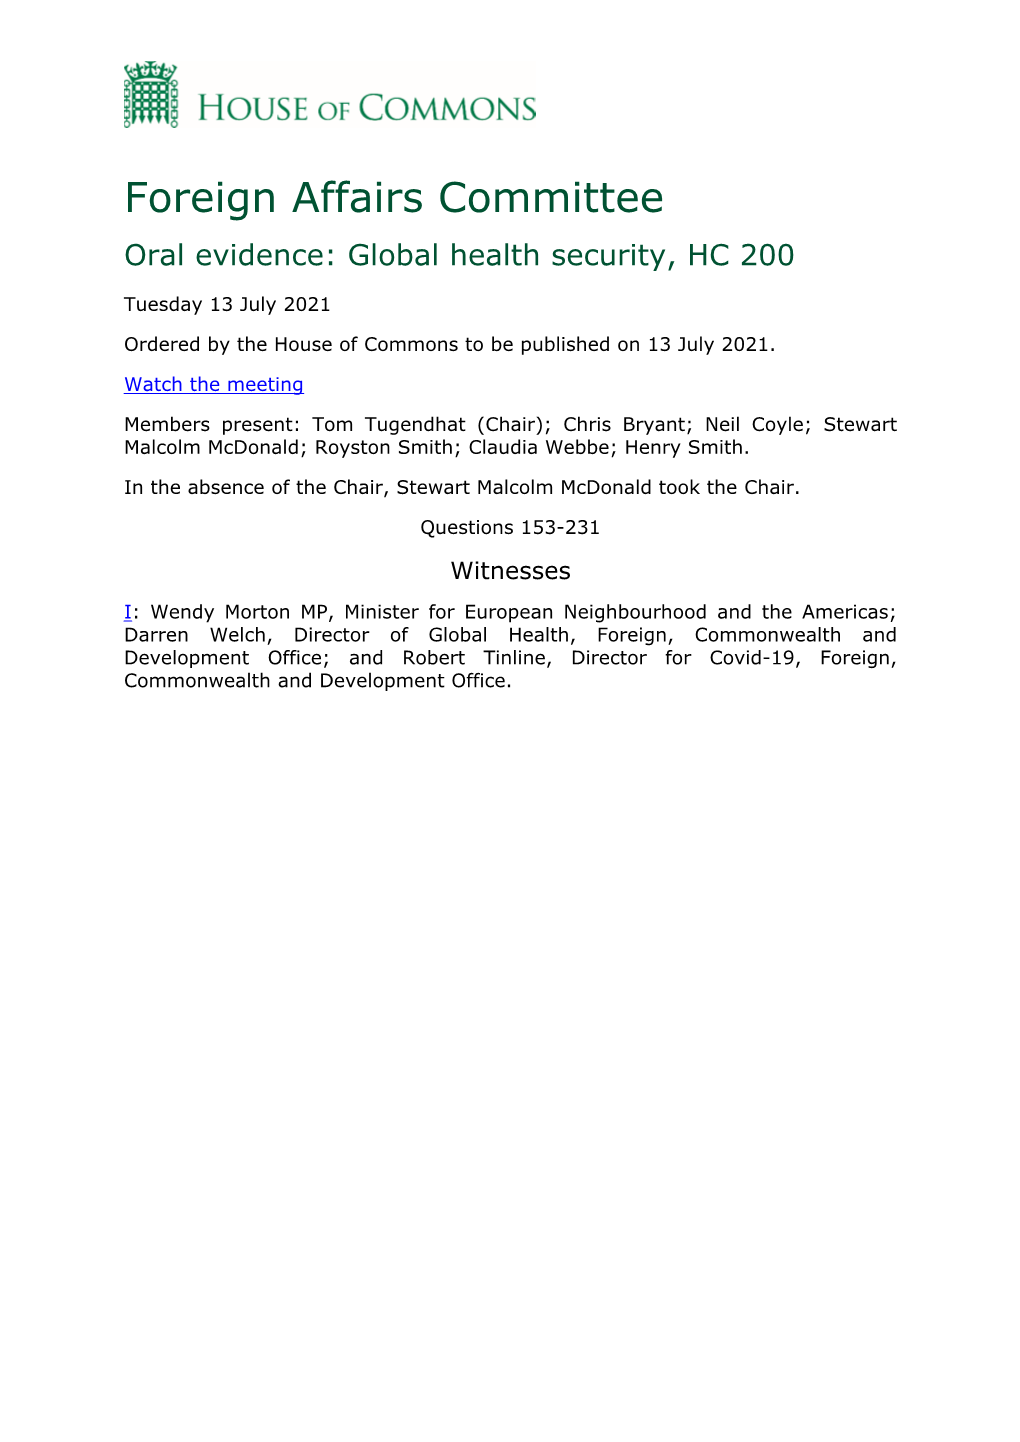 Foreign Affairs Committee Oral Evidence: Global Health Security, HC 200